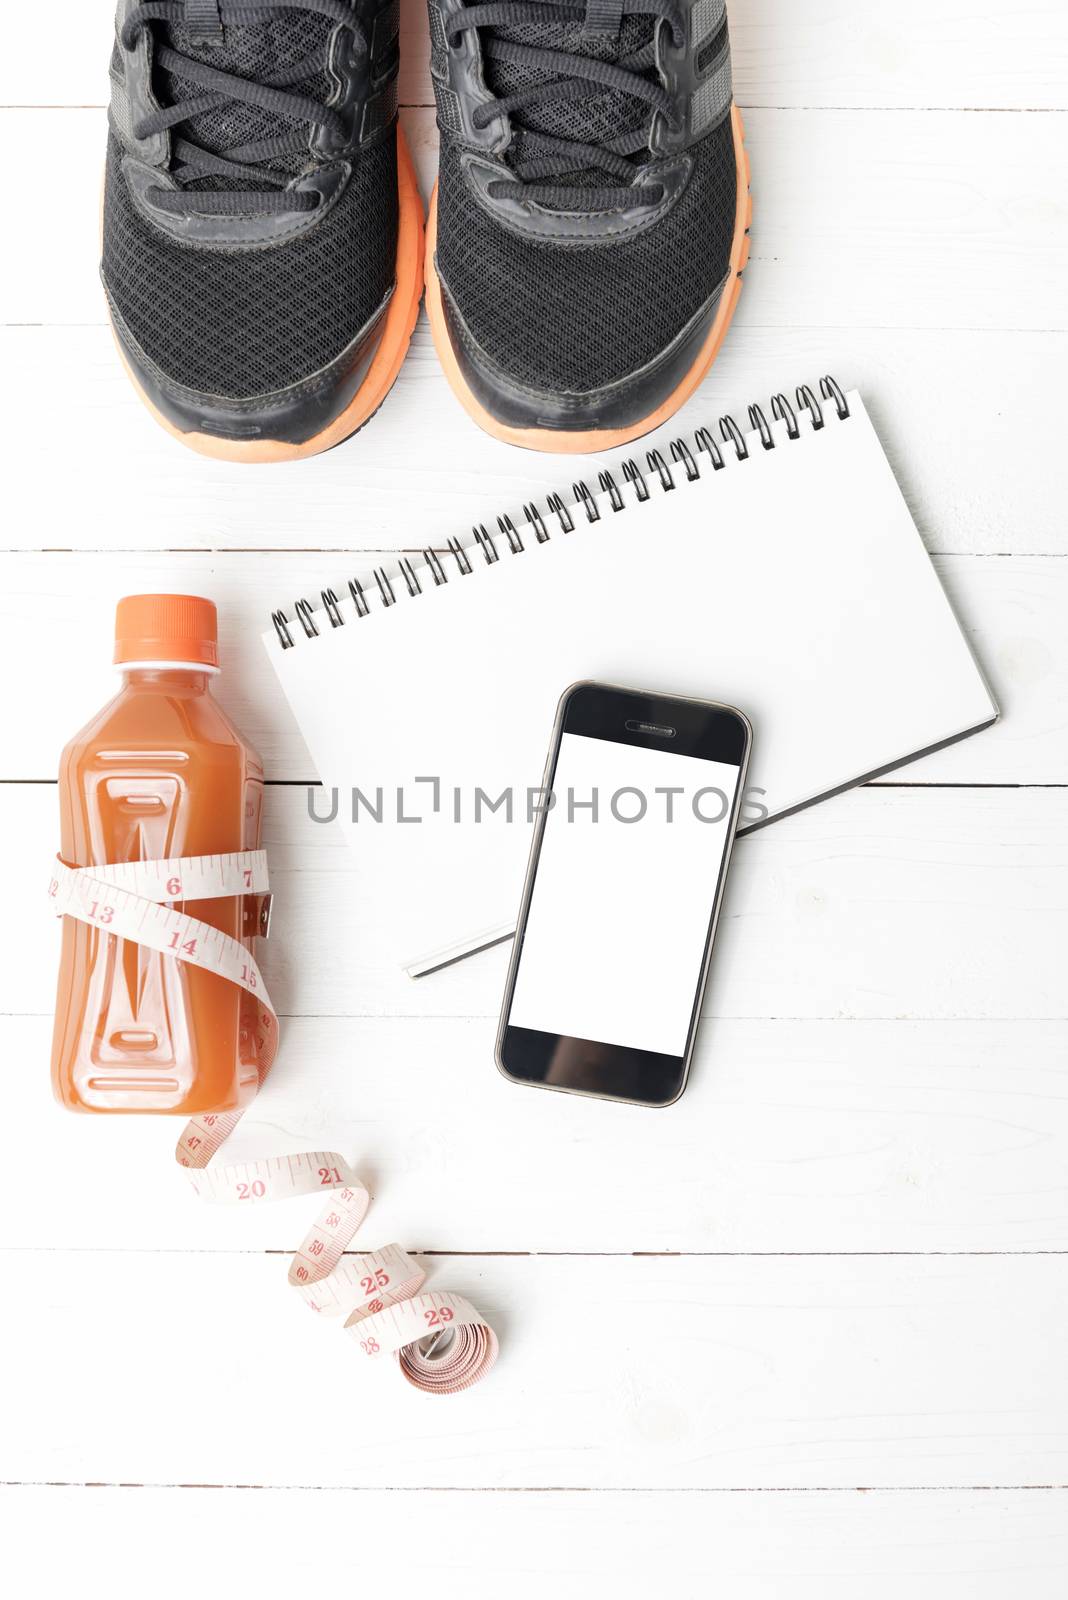 fitness equipment on white wood background by ammza12